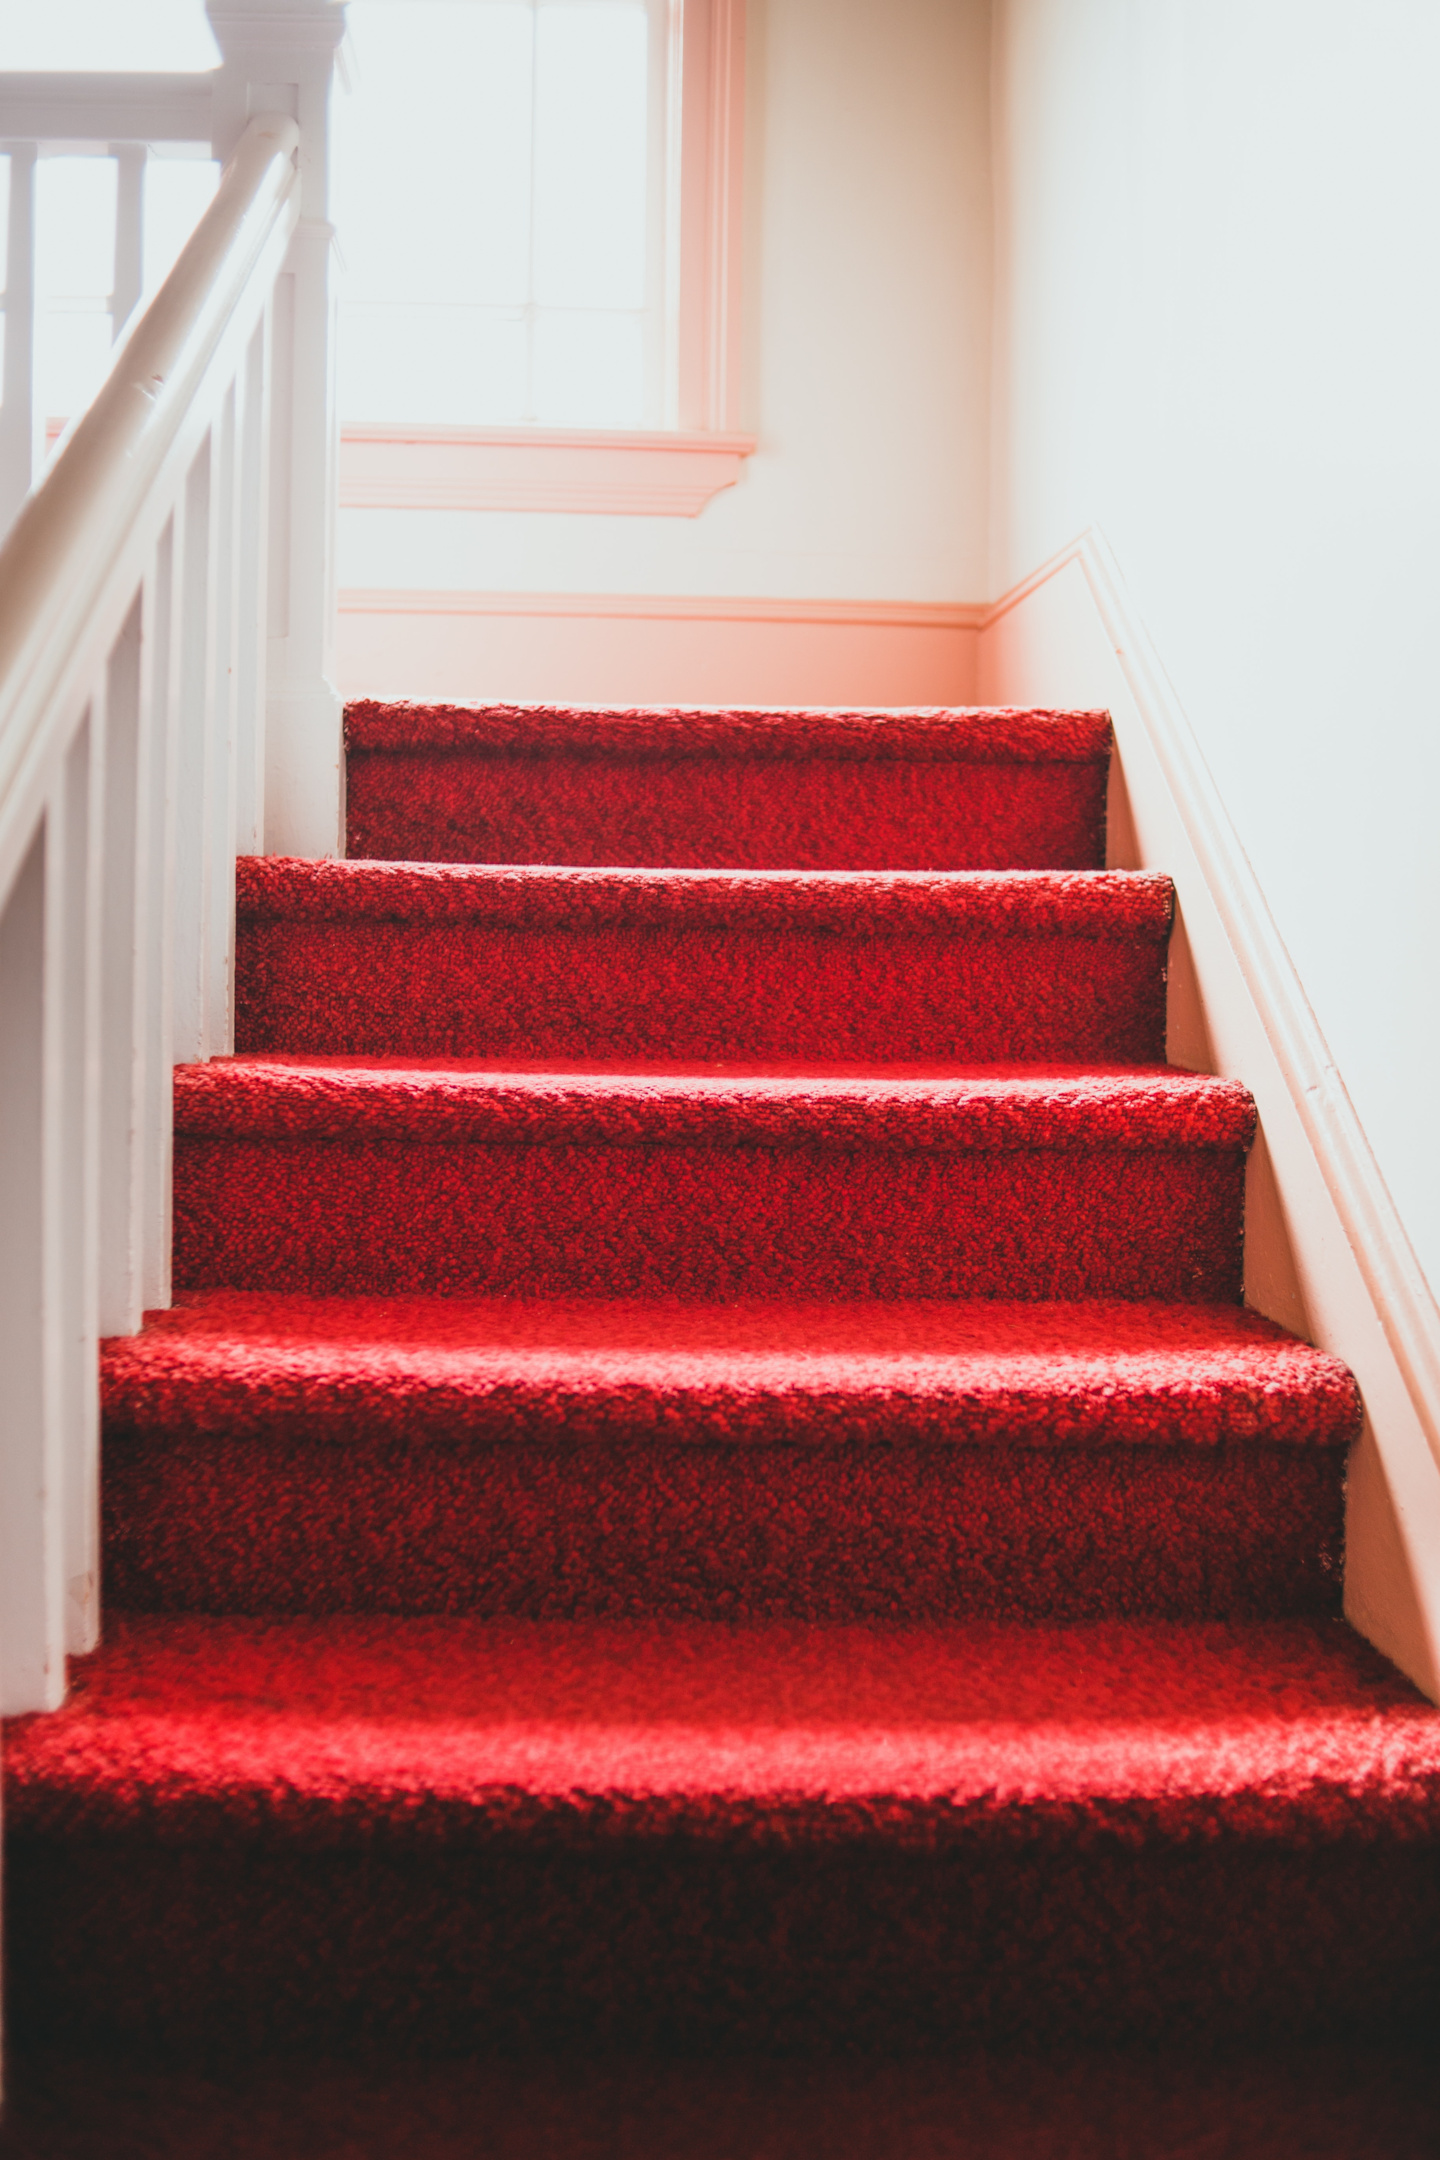 A person installing carpeted stairs on a staircase